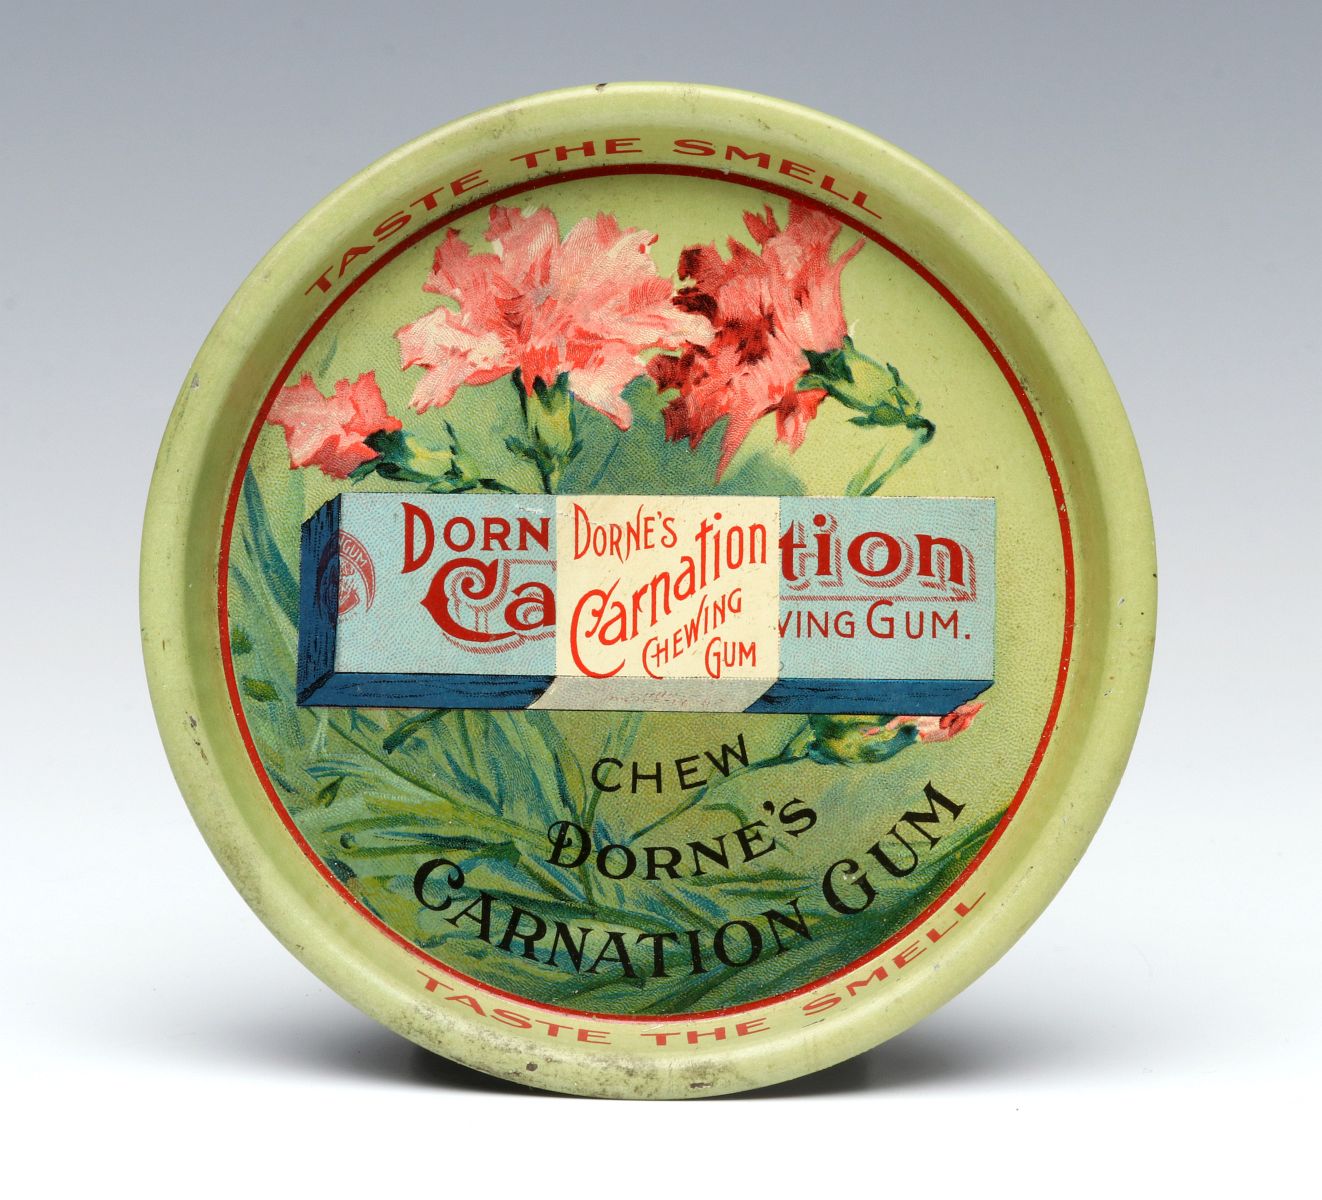 CARNATION CHEWING GUM ADVERTISING TIP TRAY